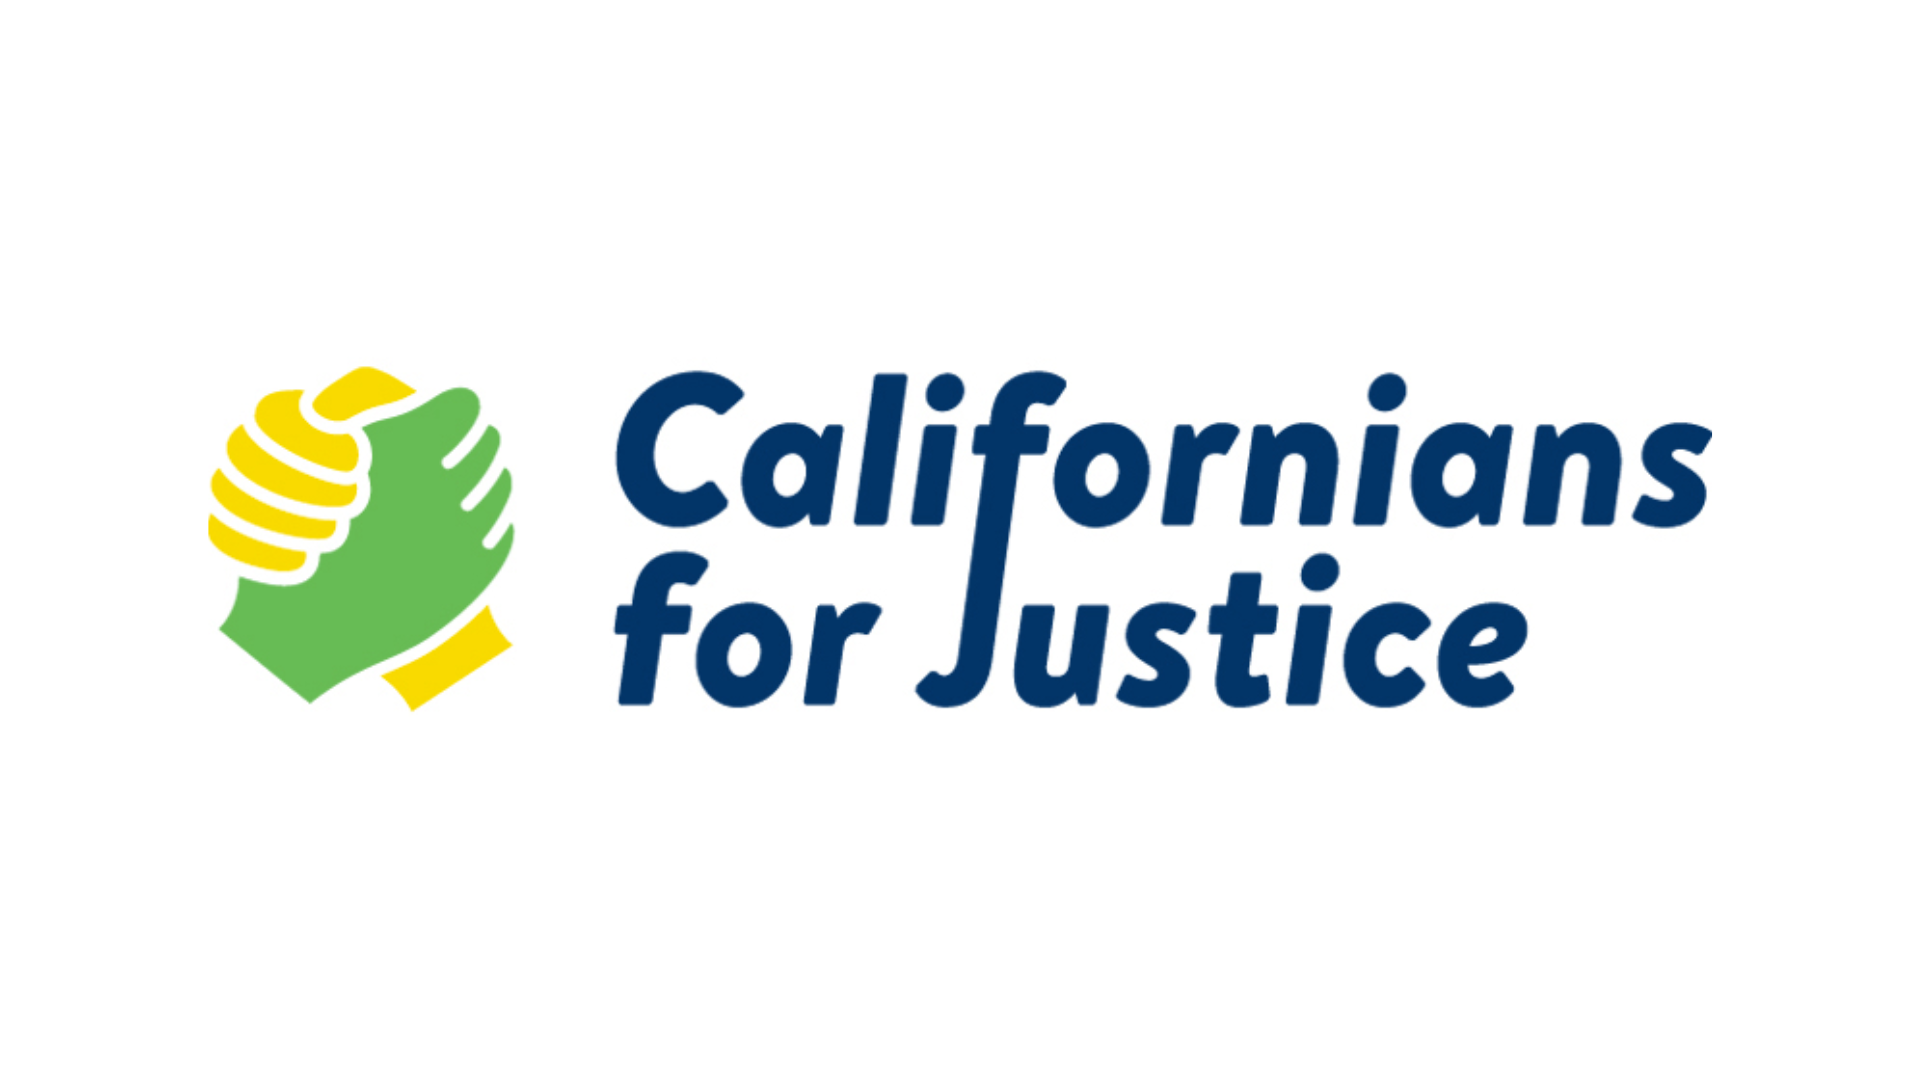 Californians for Justice logo